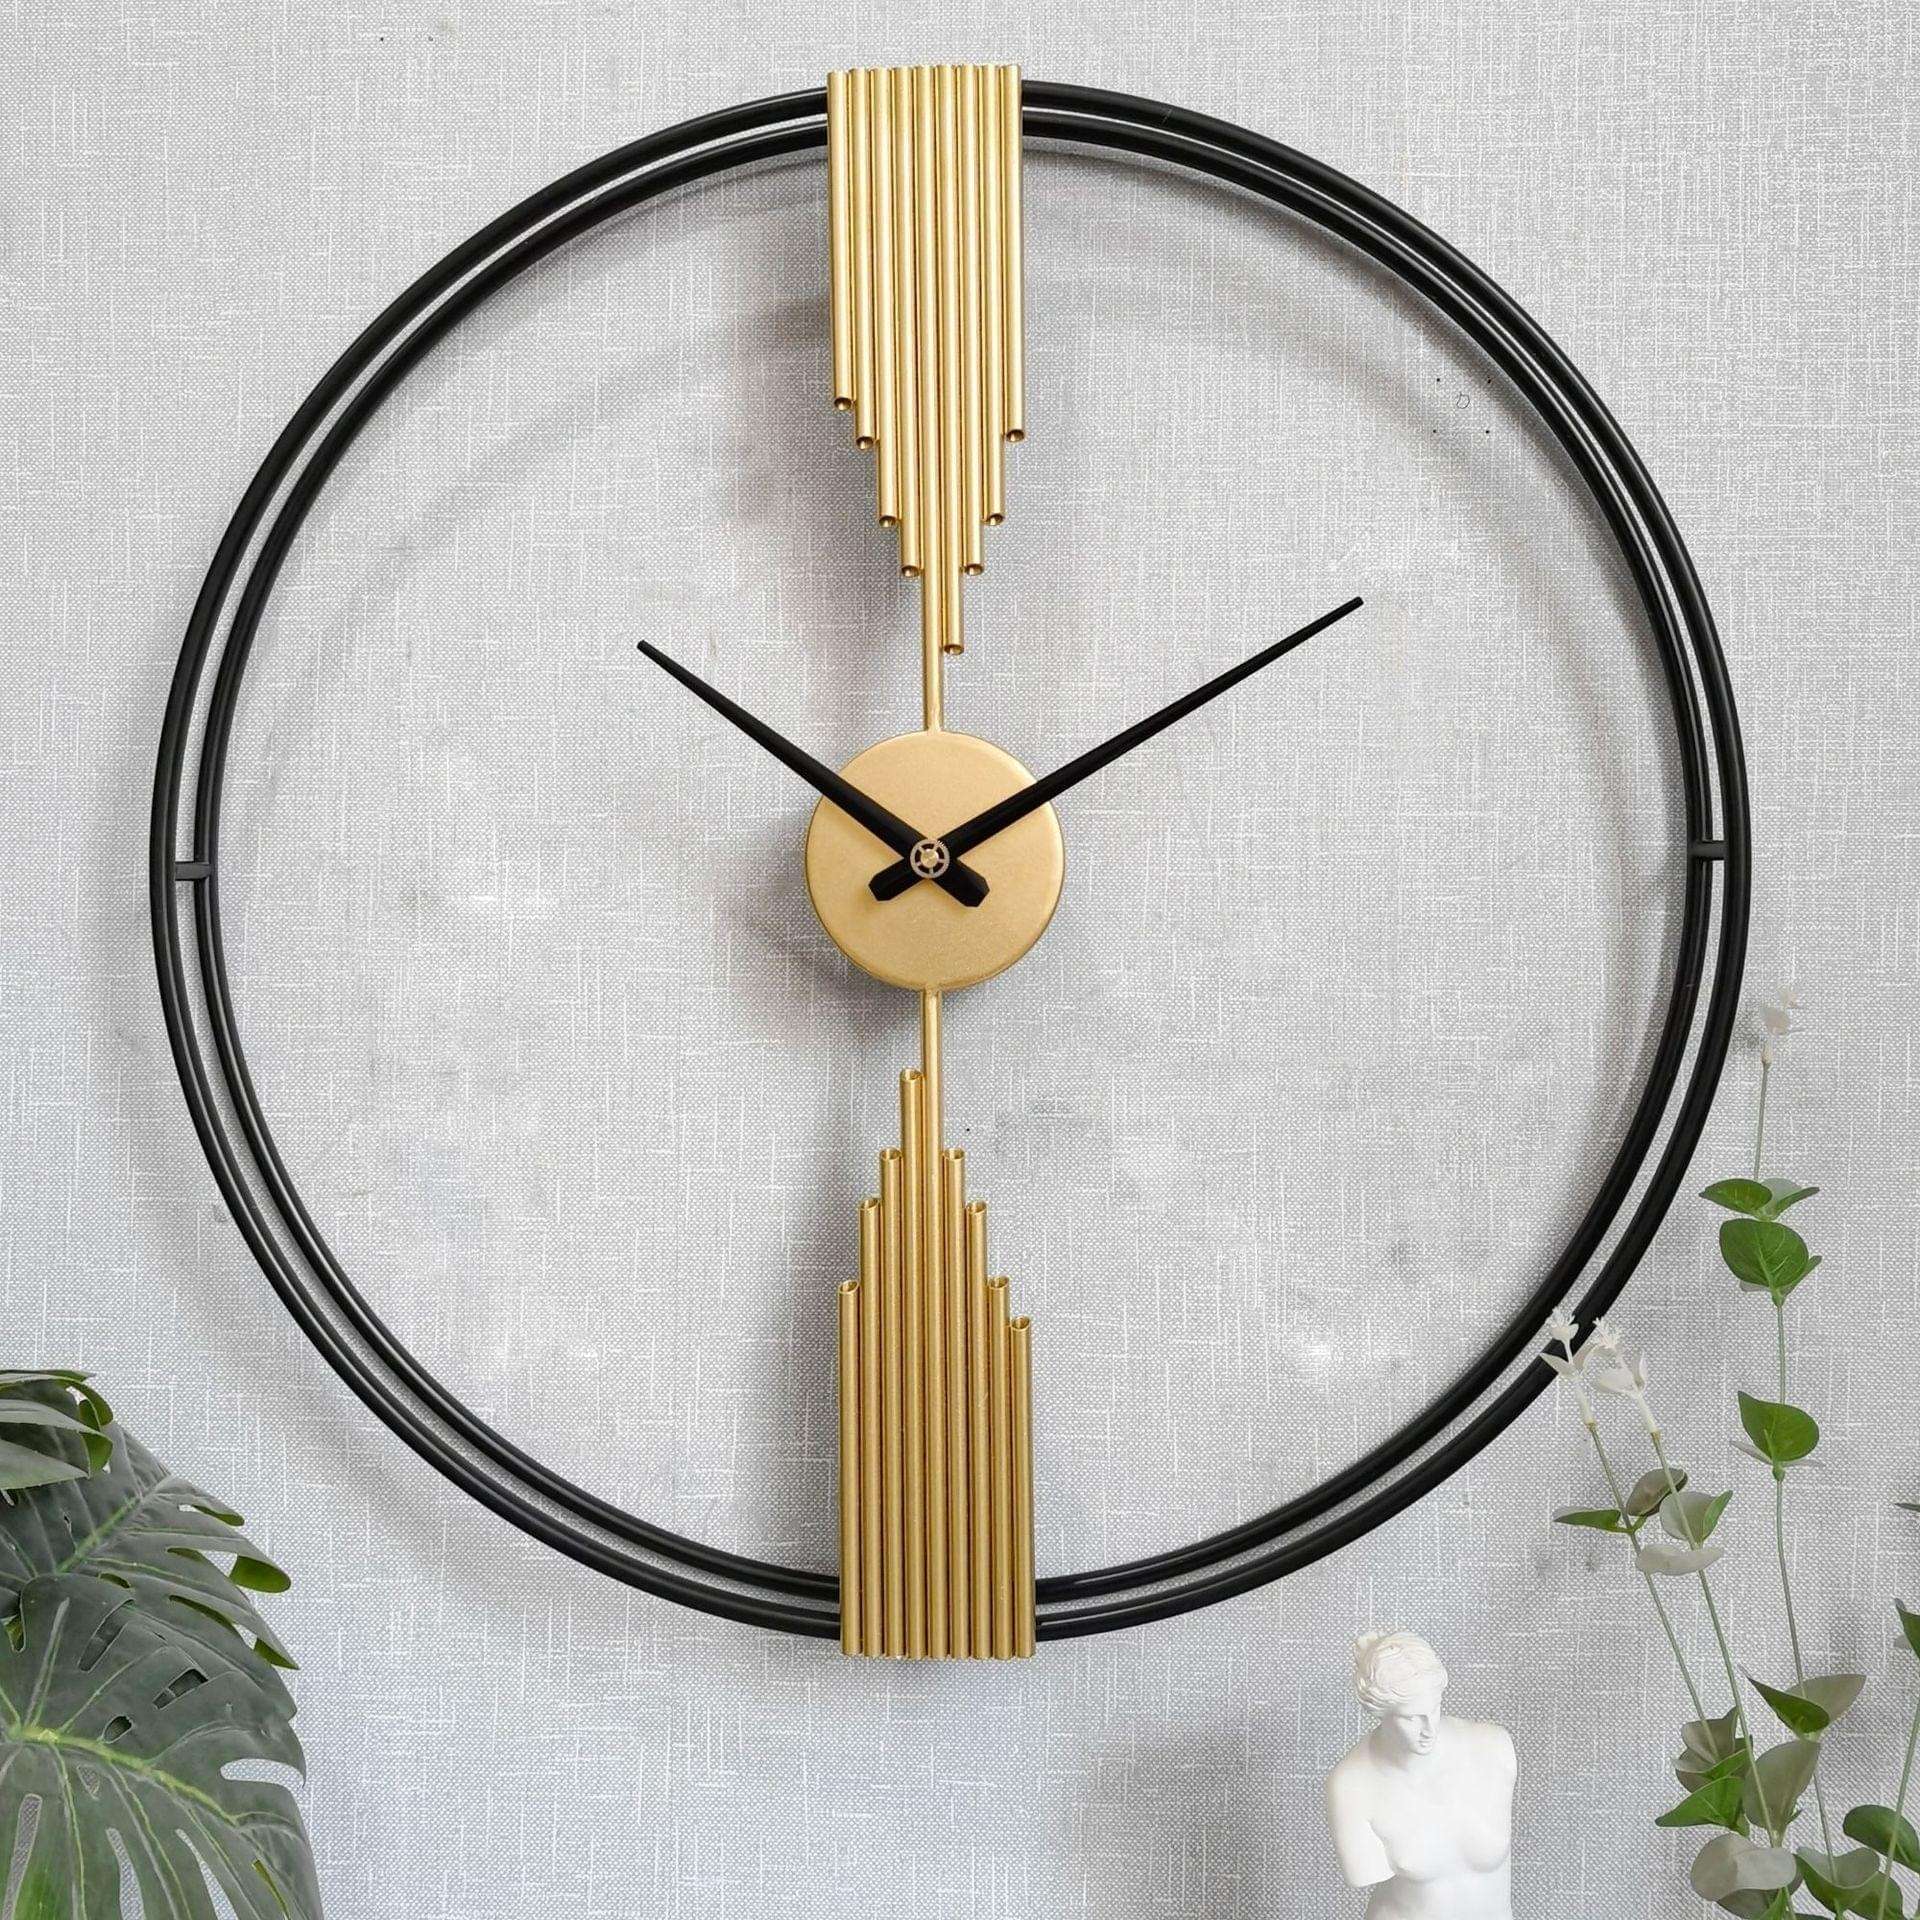 Black & Gold Double Ring Designer Wall Clock Writings On The Wall Metal Wall Clock